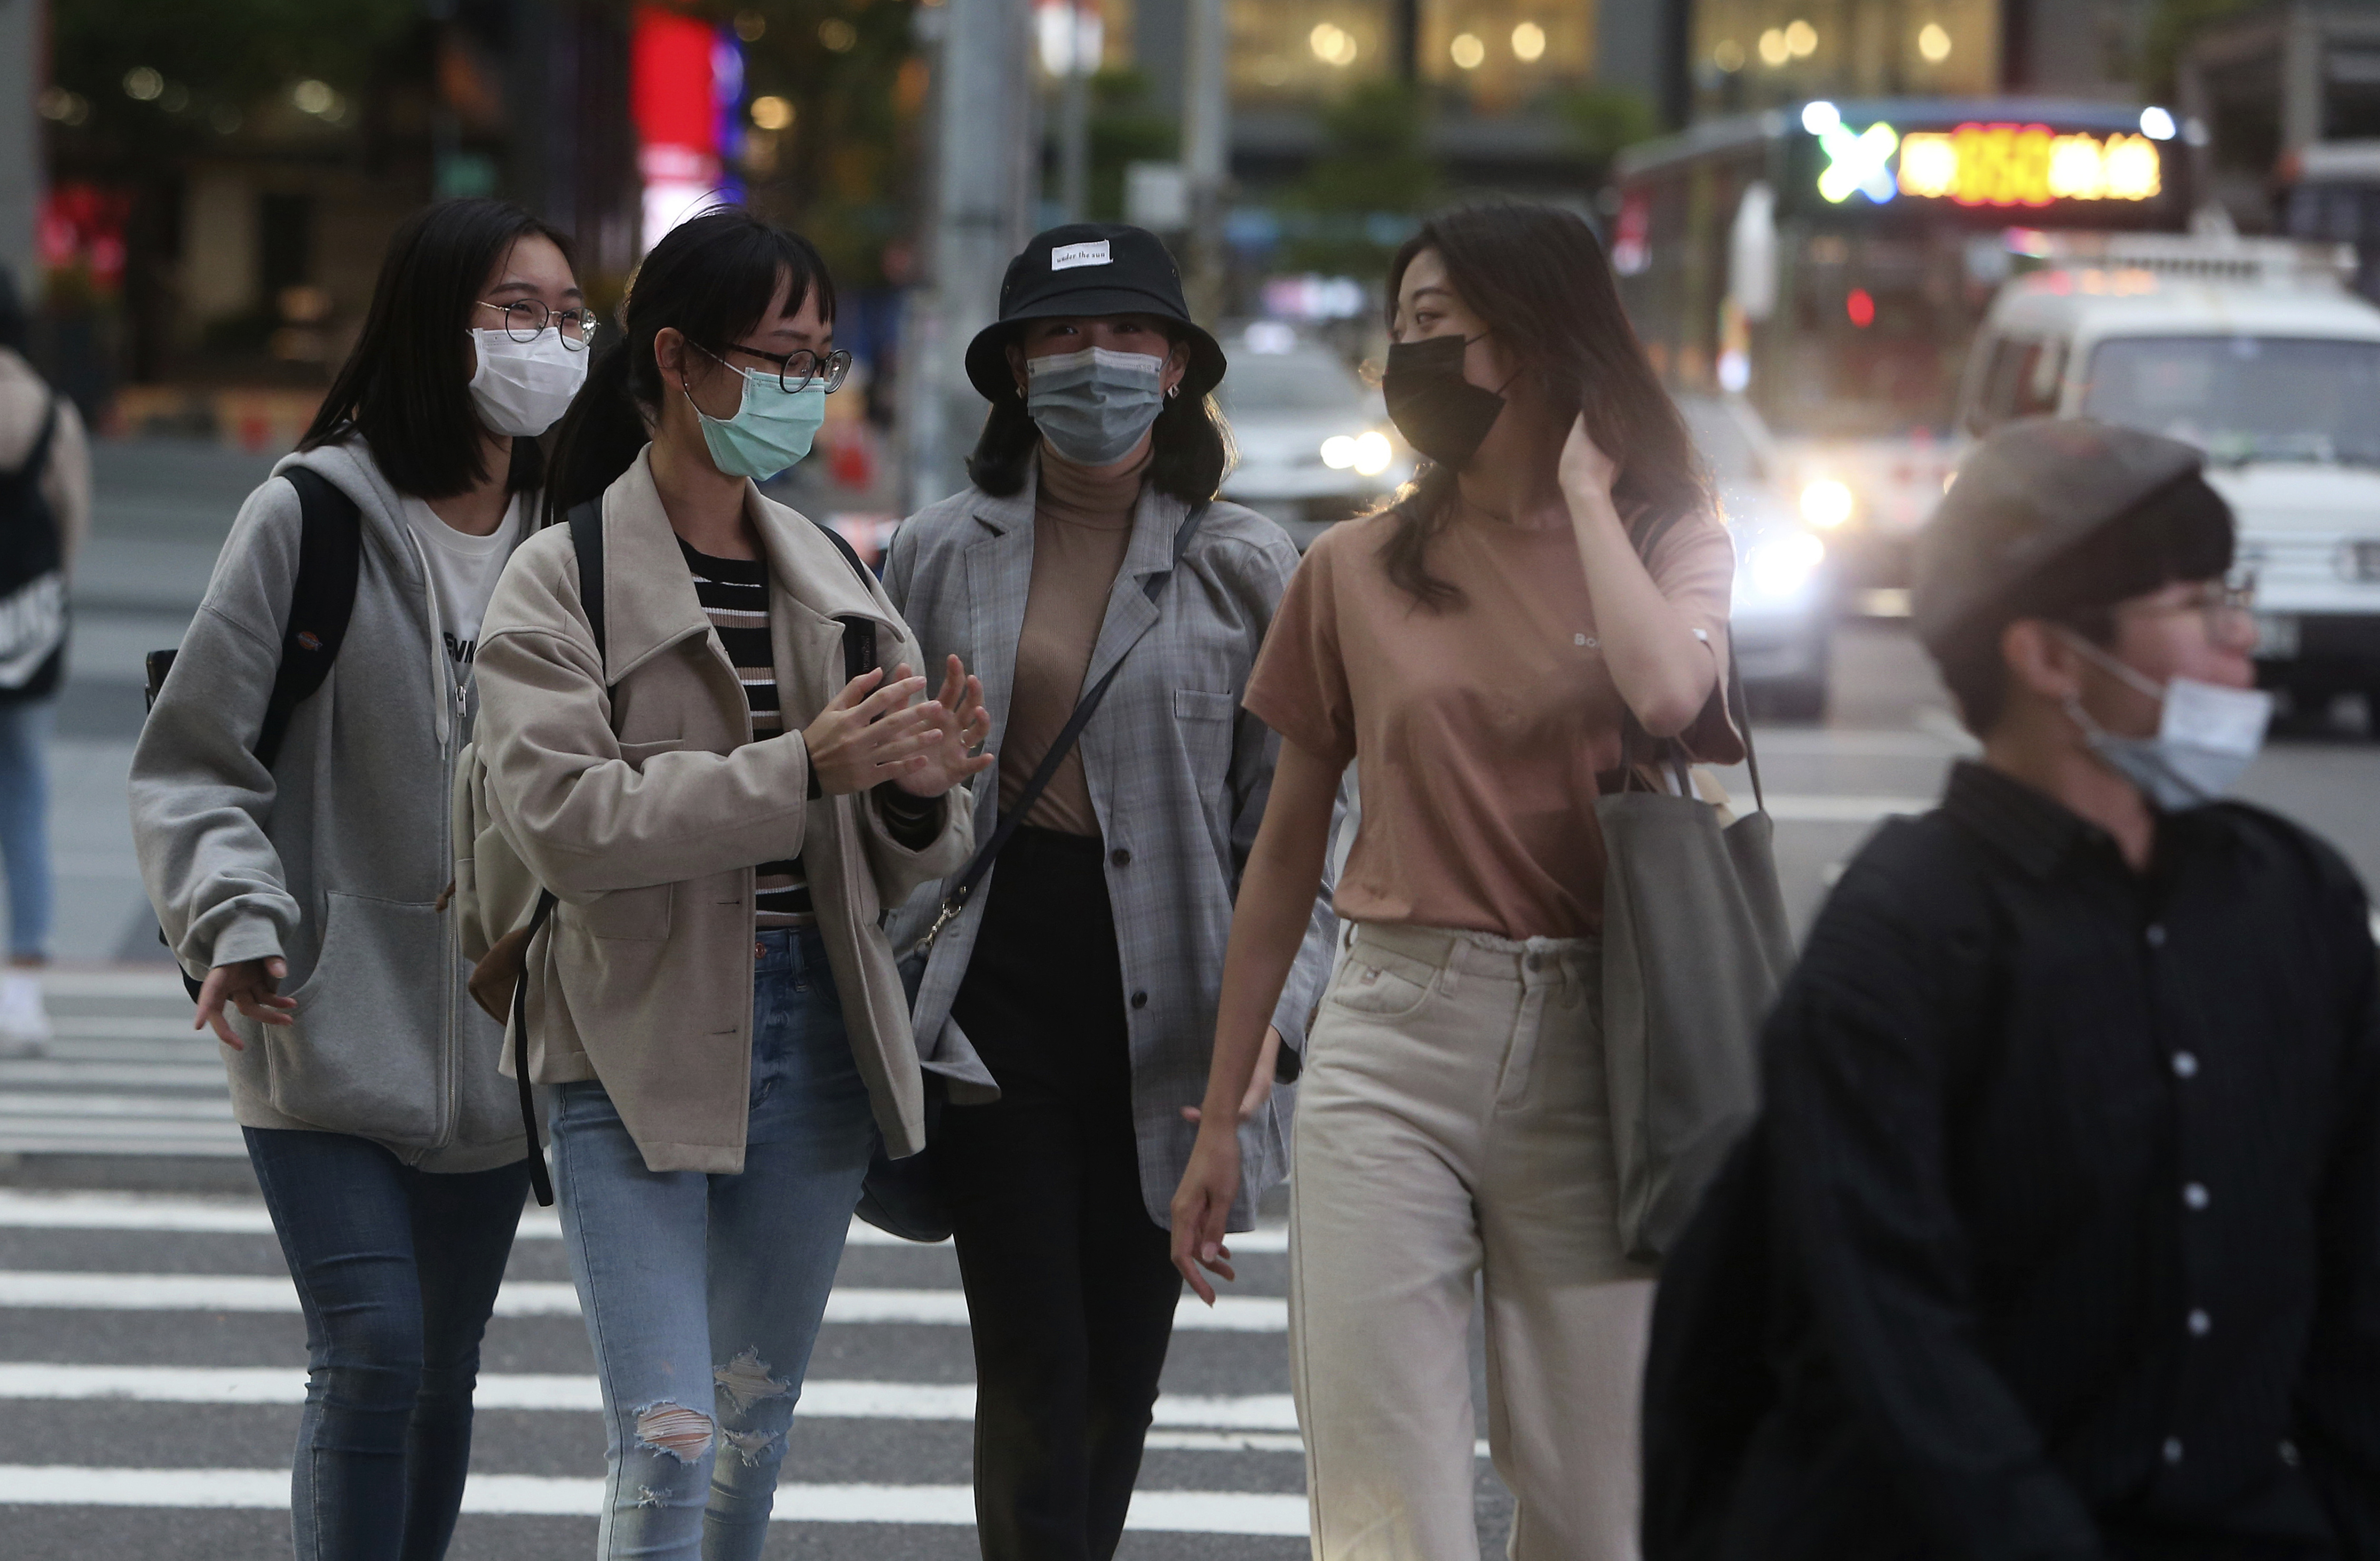 Pedestrians wear face masks to protect against the spread of the coronavirus